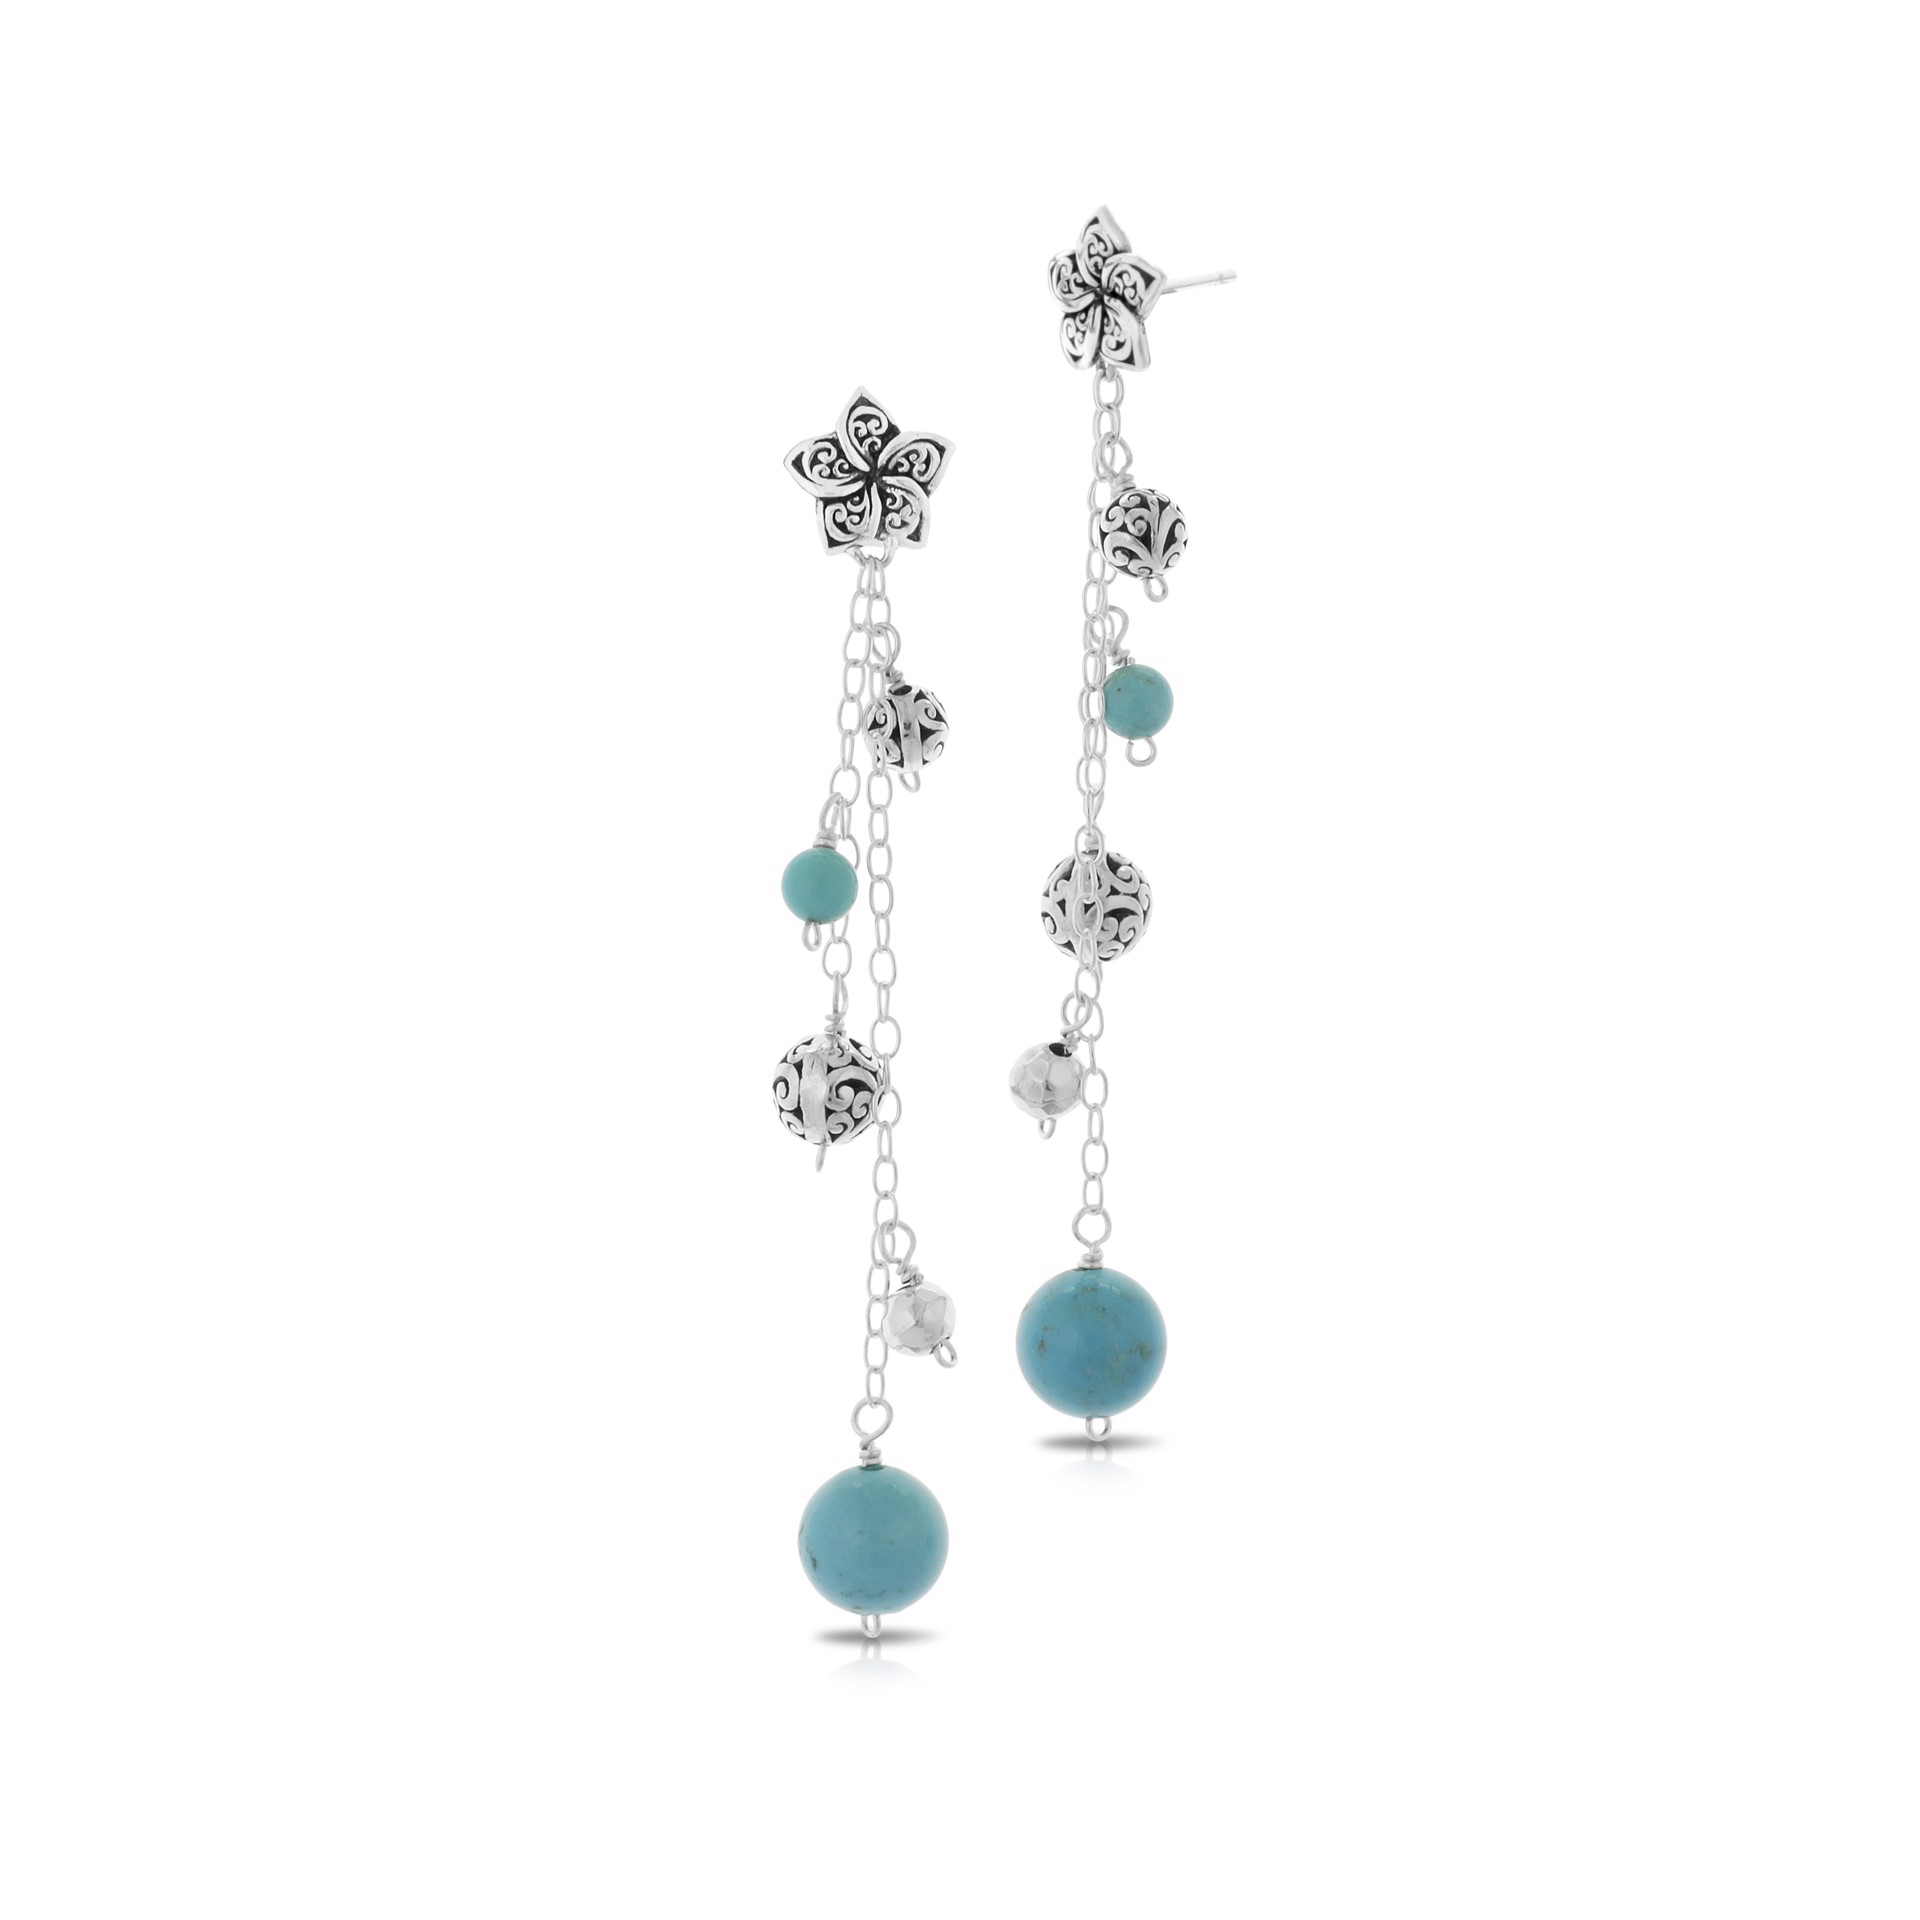 9708 Multi-Layer Blue Turquoise Earrings and LH Scroll Beads Dangle Earrings on Flower Posts by Lois Hill